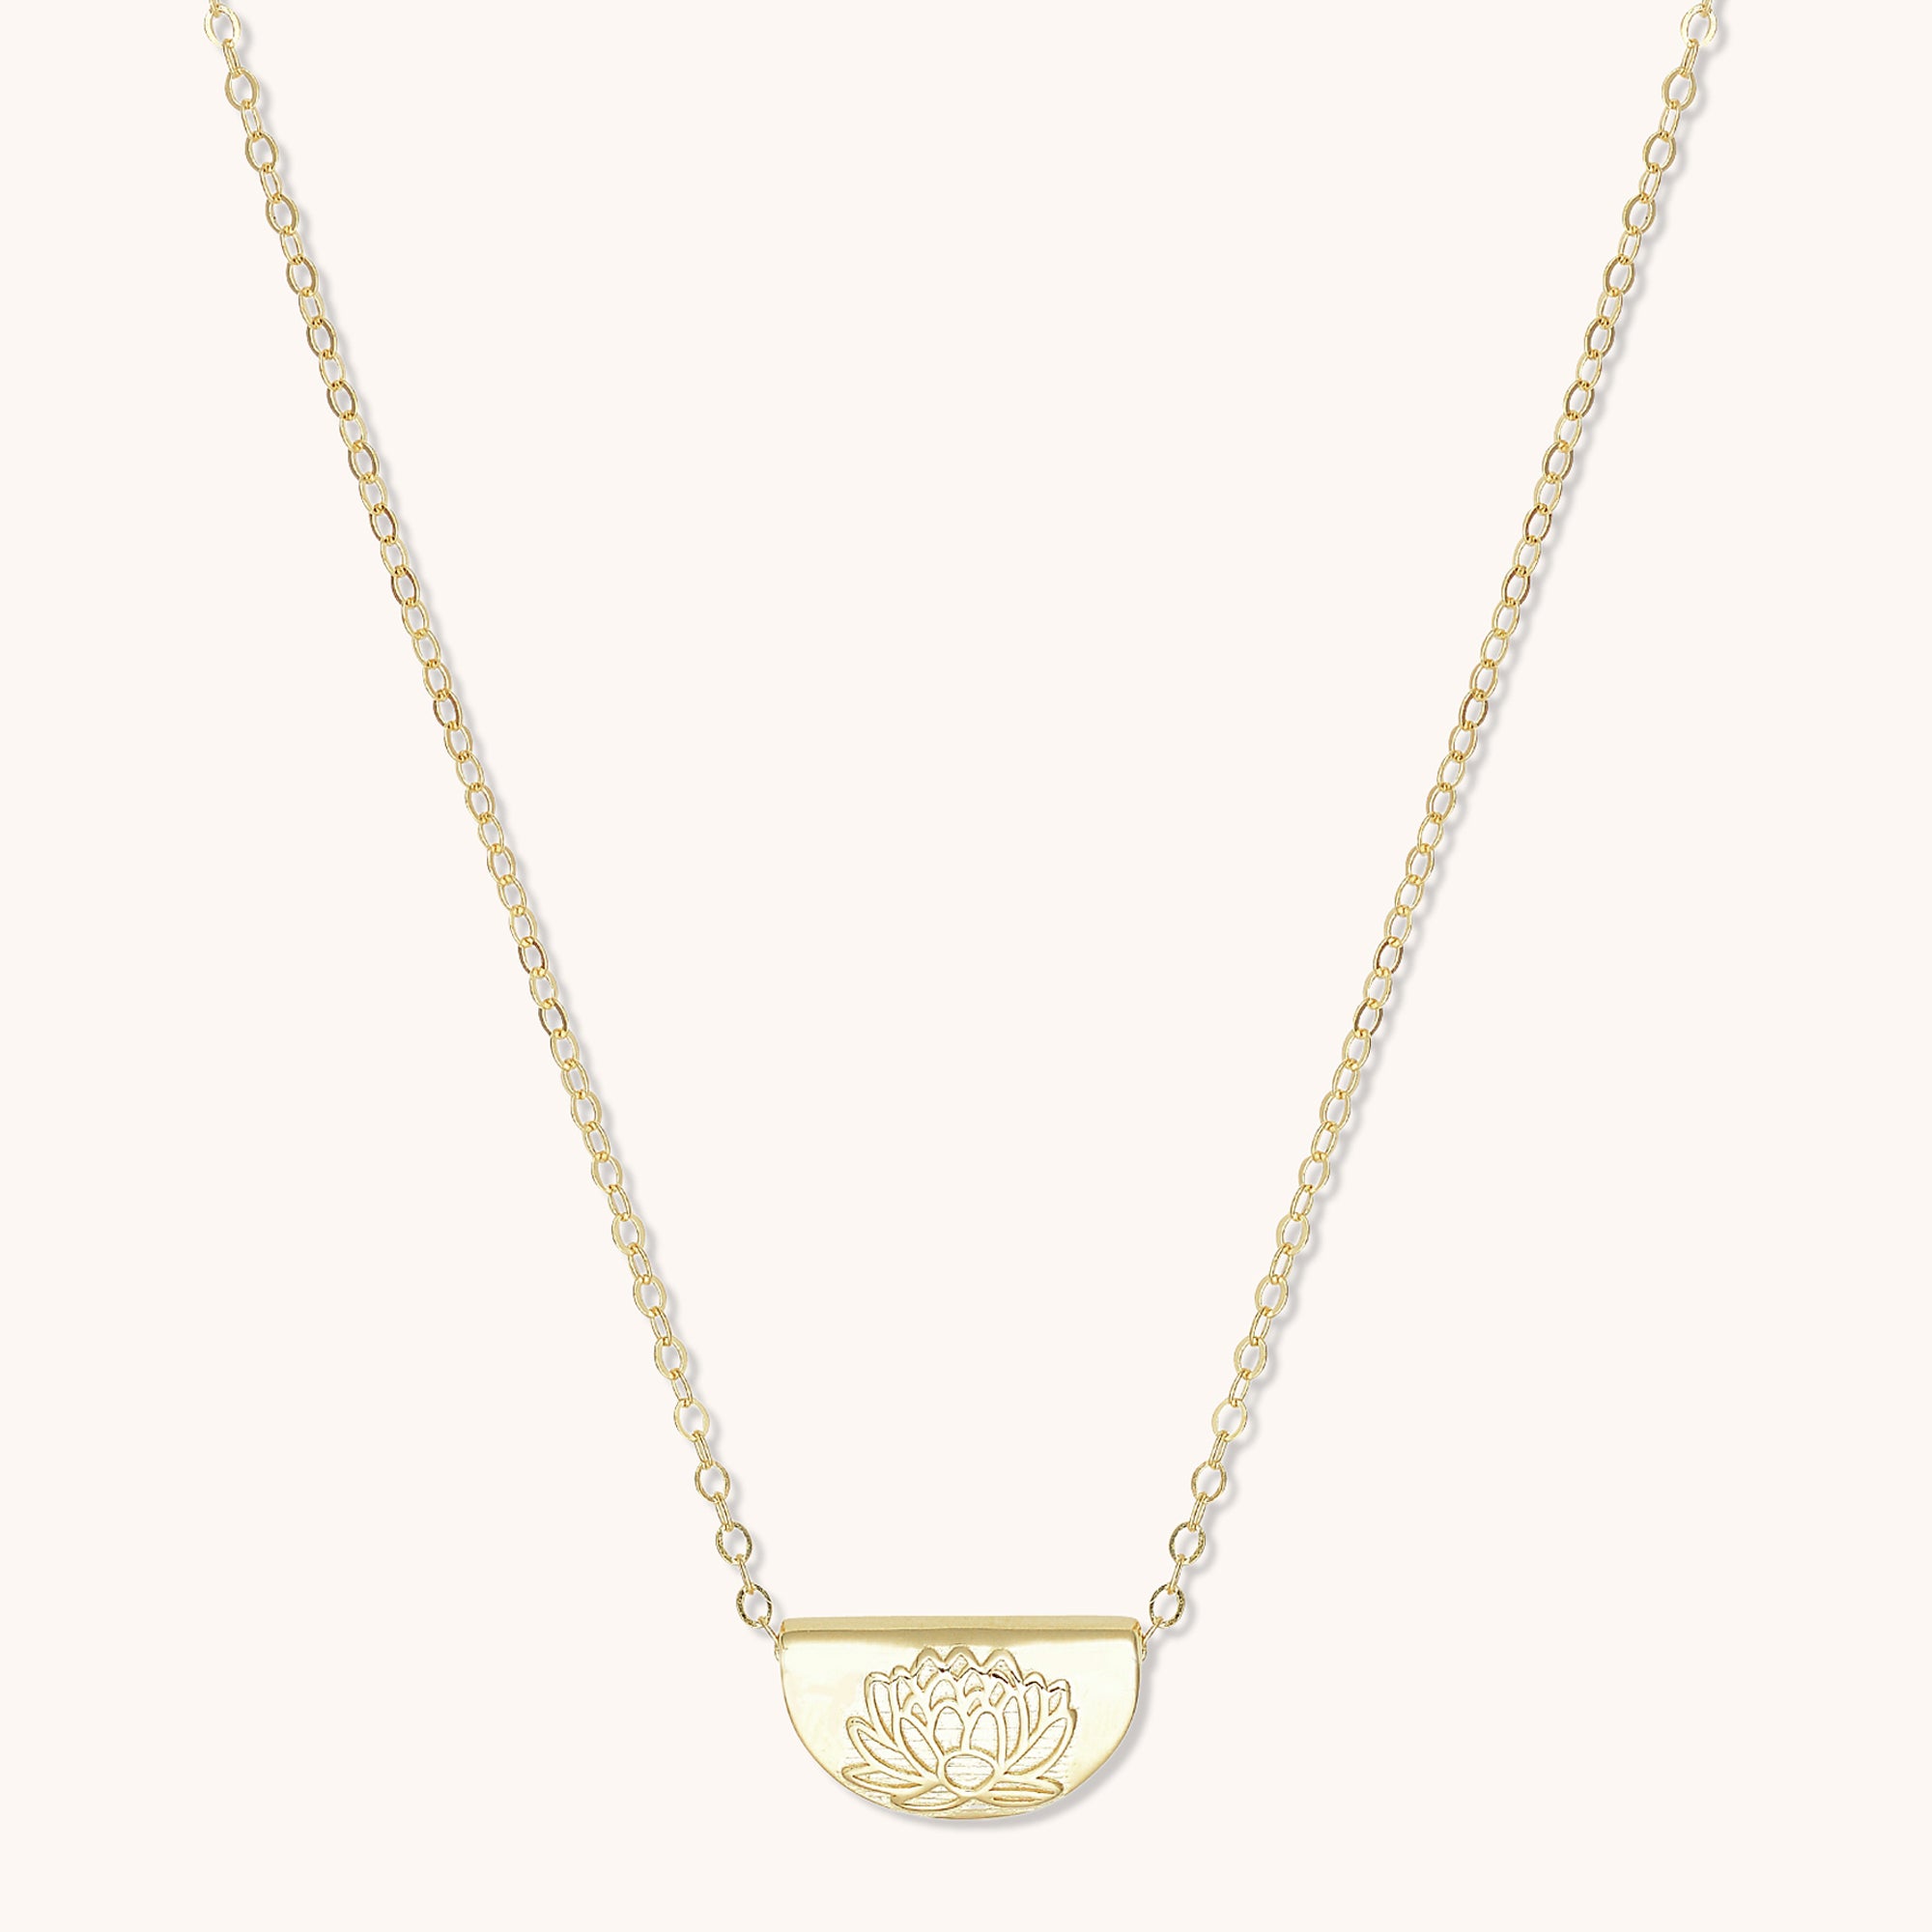 Birth Flower Necklace July (Lotus) Gold